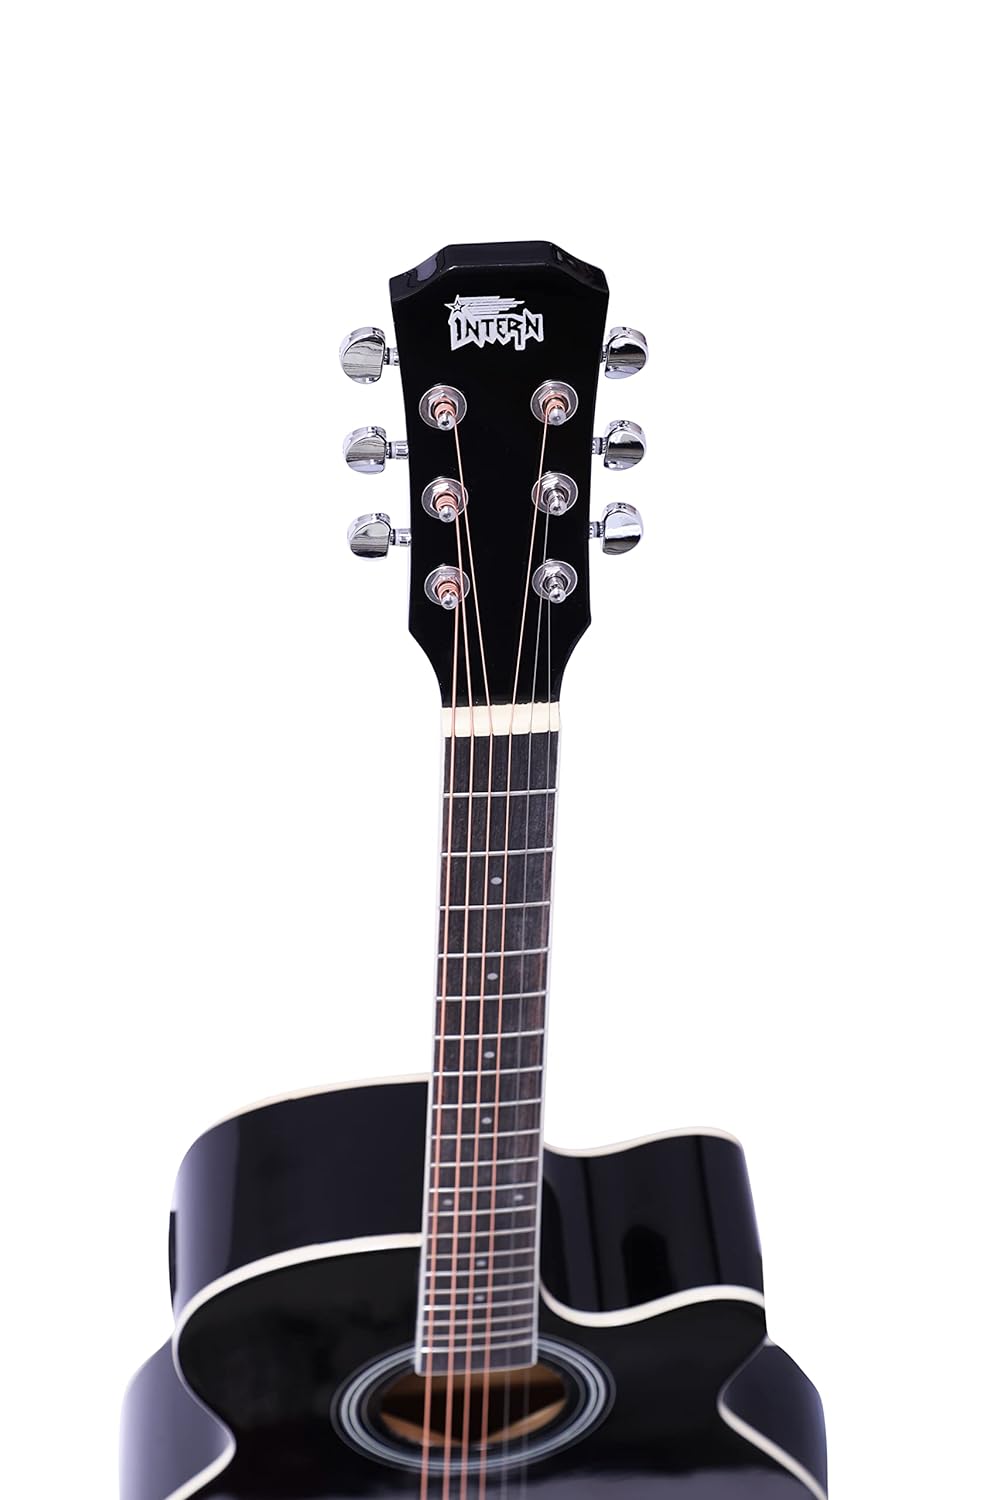 INTERN 40 inches Acoustic Guitar with Pick-up & truss rod, carry bag, strings pack, strap & picks. Premium Wooden durable built, tonal stability with professional sound amplificaiton. (Black).